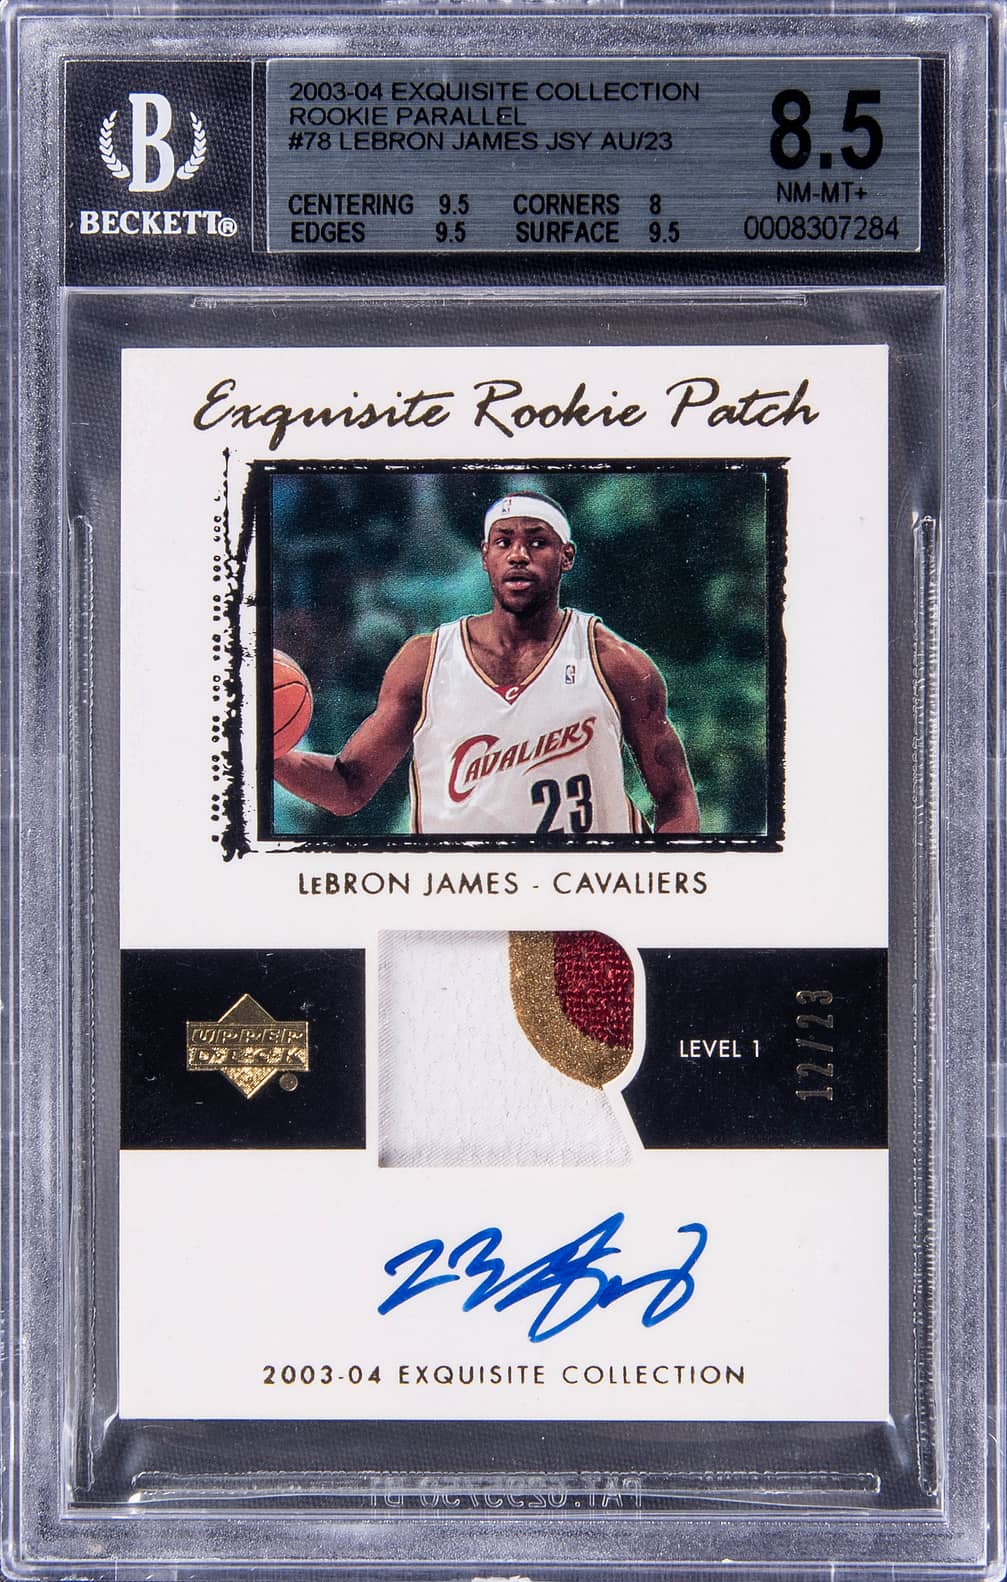 2003-04 Upper Deck Exquisite Collection Rookie Patch Autograph Parallel (RPA) #78 LeBron James Signed Patch Rookie Card (#12/23) – BGS NM MT+ 8.5/Beckett 10